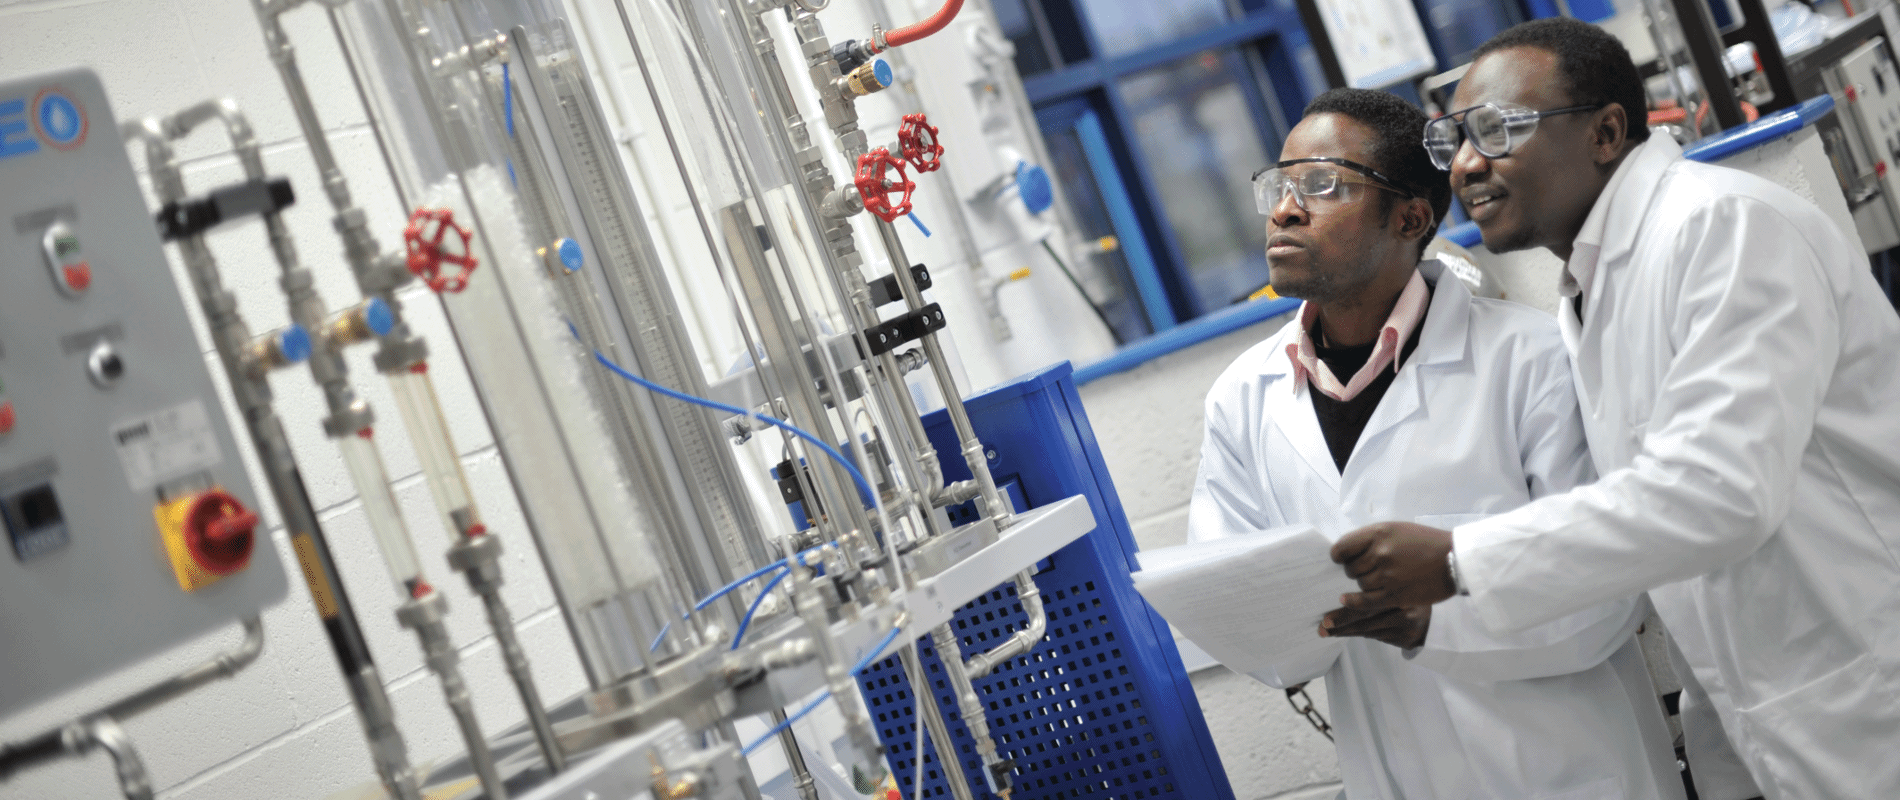 MSc Advanced Chemical Engineering Course | University of Hull